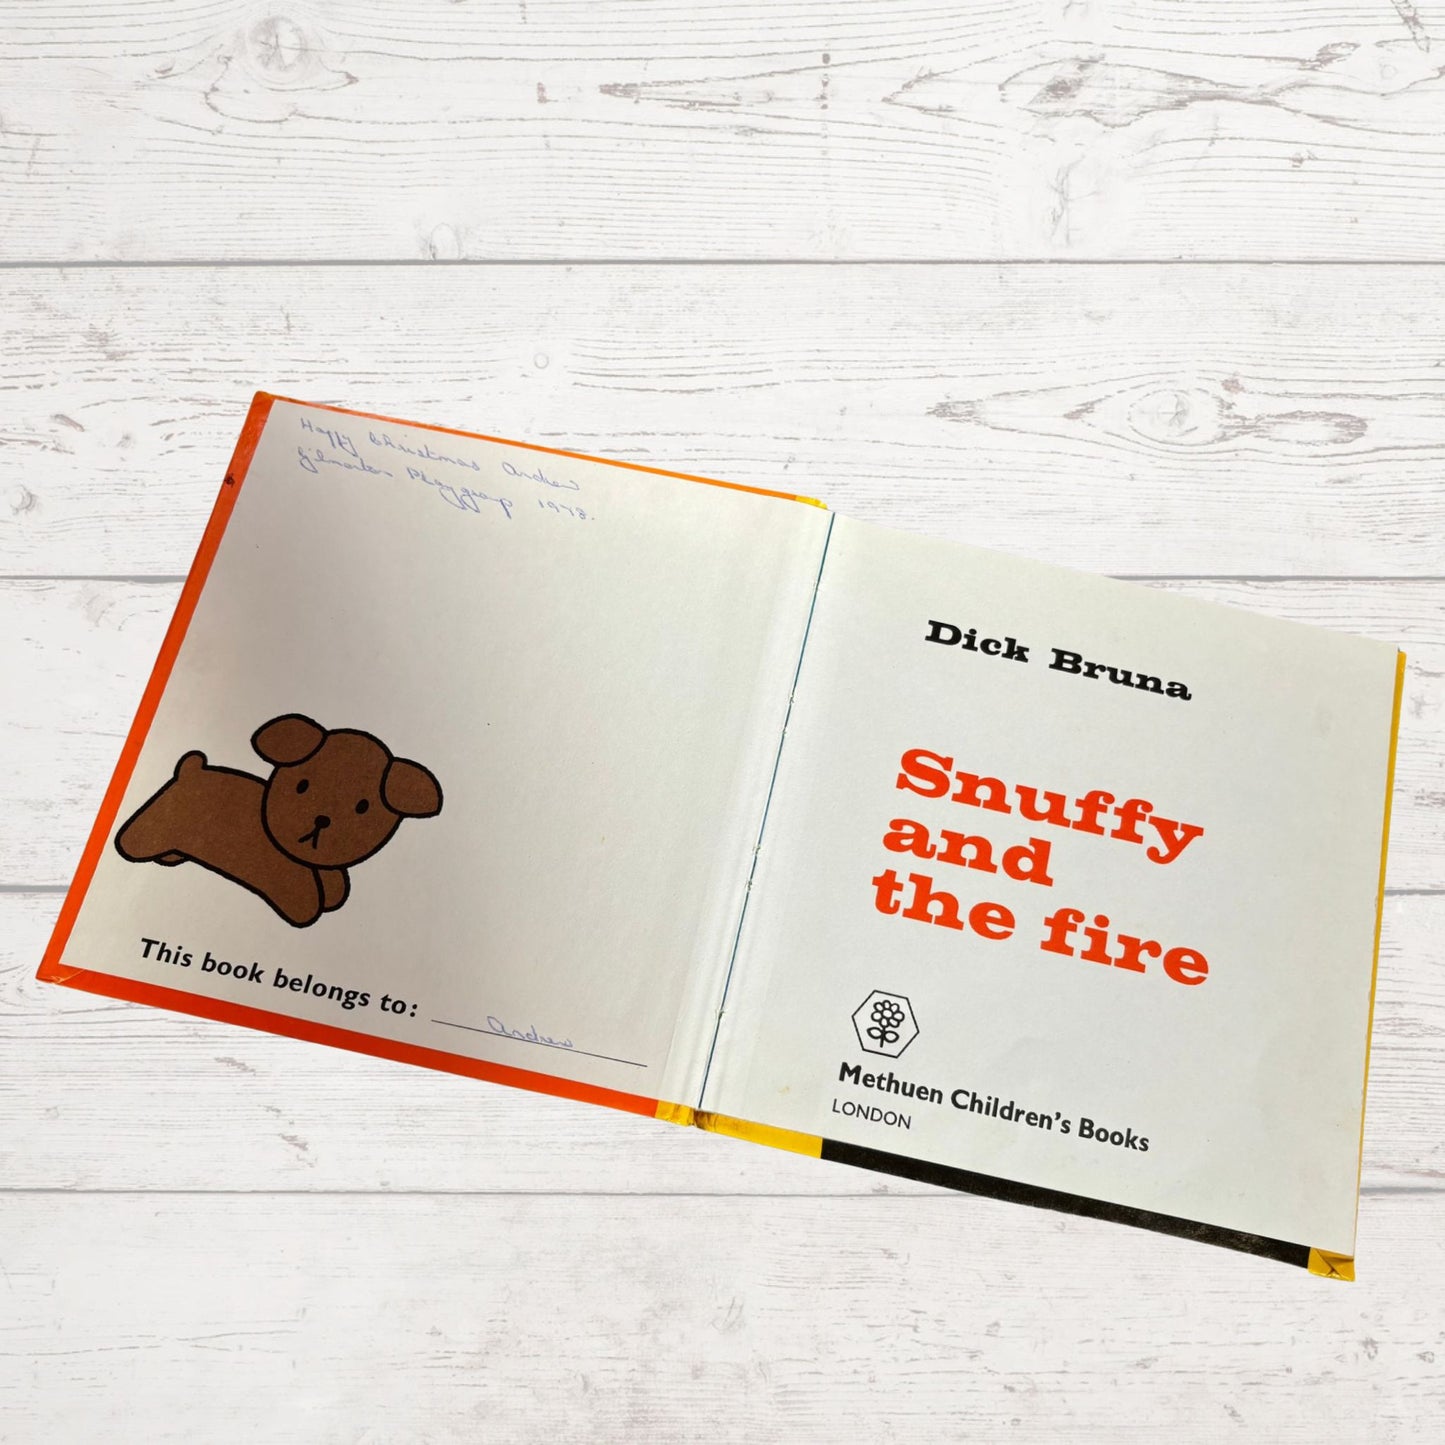 Vintage 1970s Dick Bruna Hardcover Children's Book - Snuffy and the Fire: A Bright and Colourful Tale of Heroism